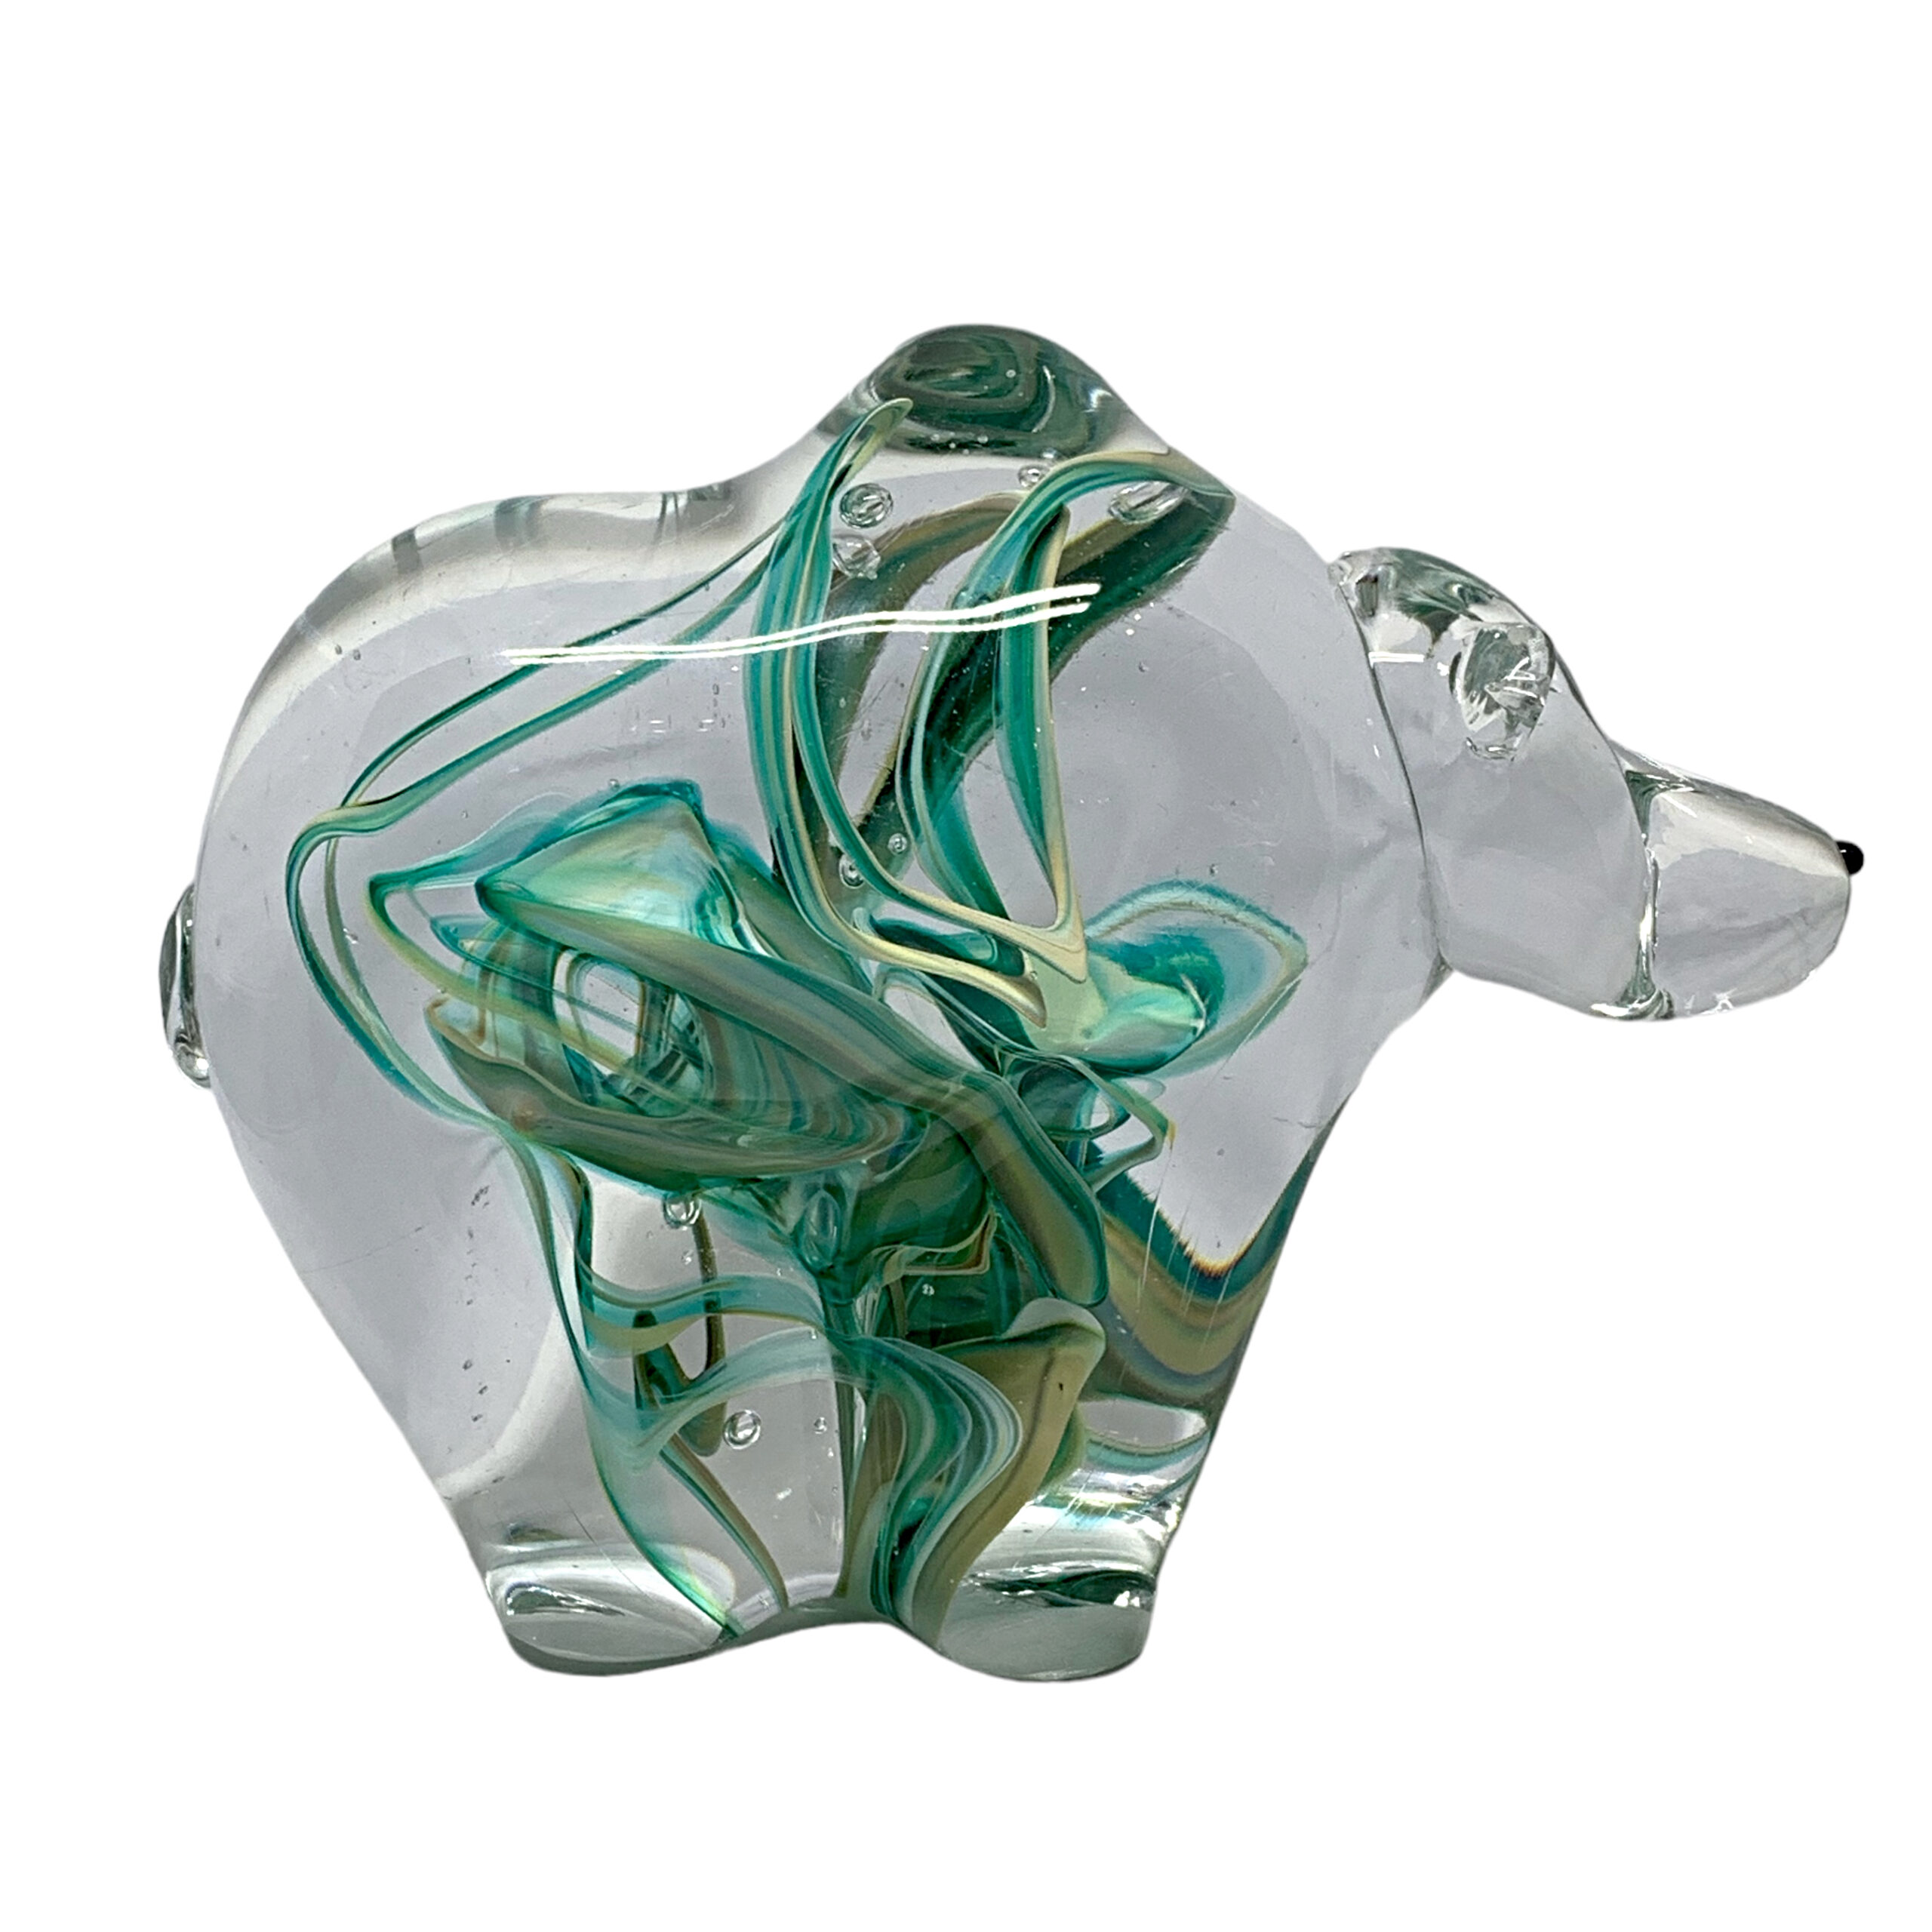 Galaxy Bear 8, blown glass bear by Hayden MacRae at Effusion Art Gallery in Invermere, BC